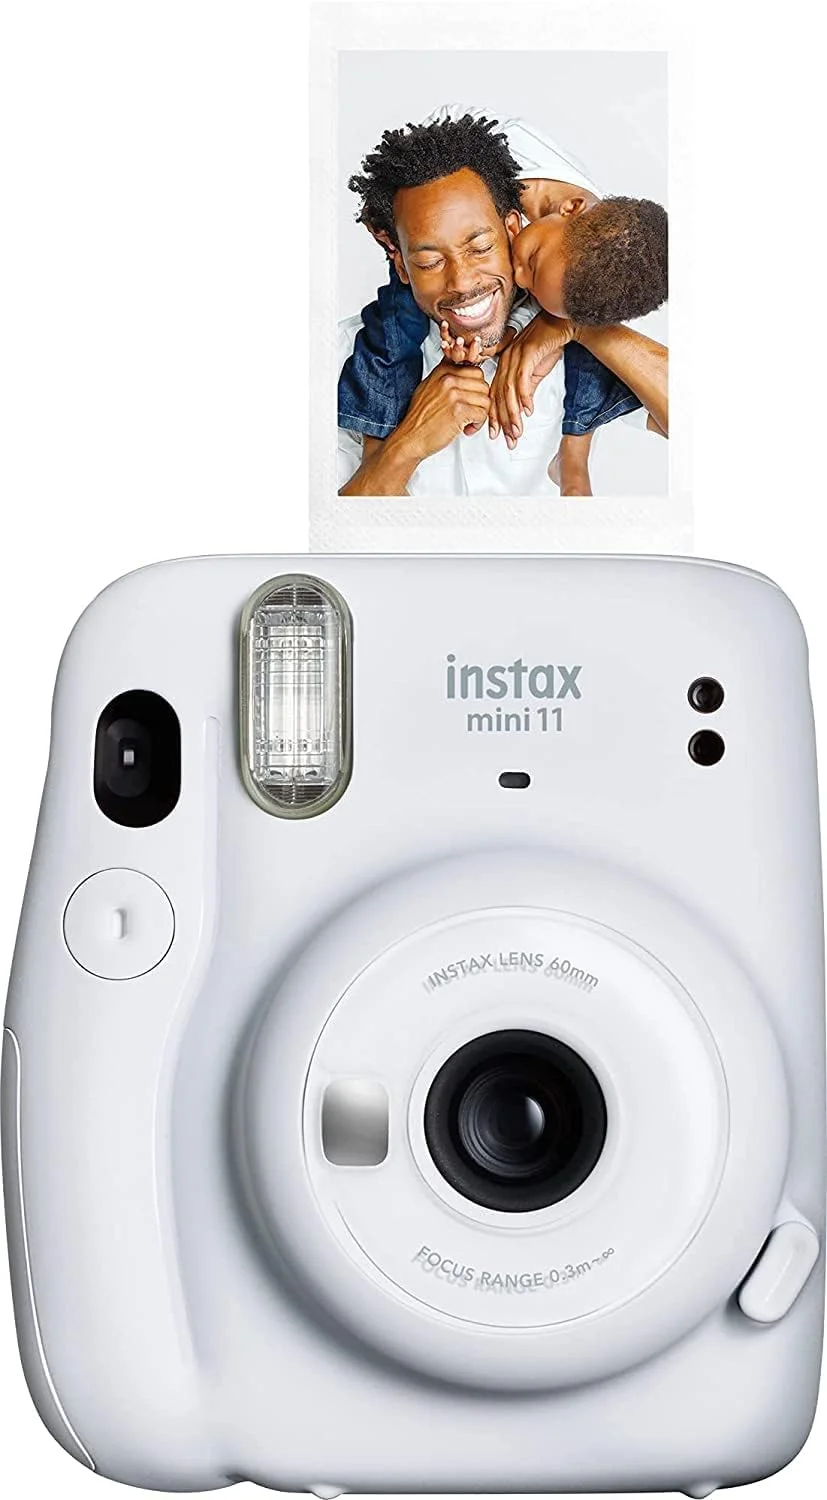 Instant Film Camera - gifts for teenage boys